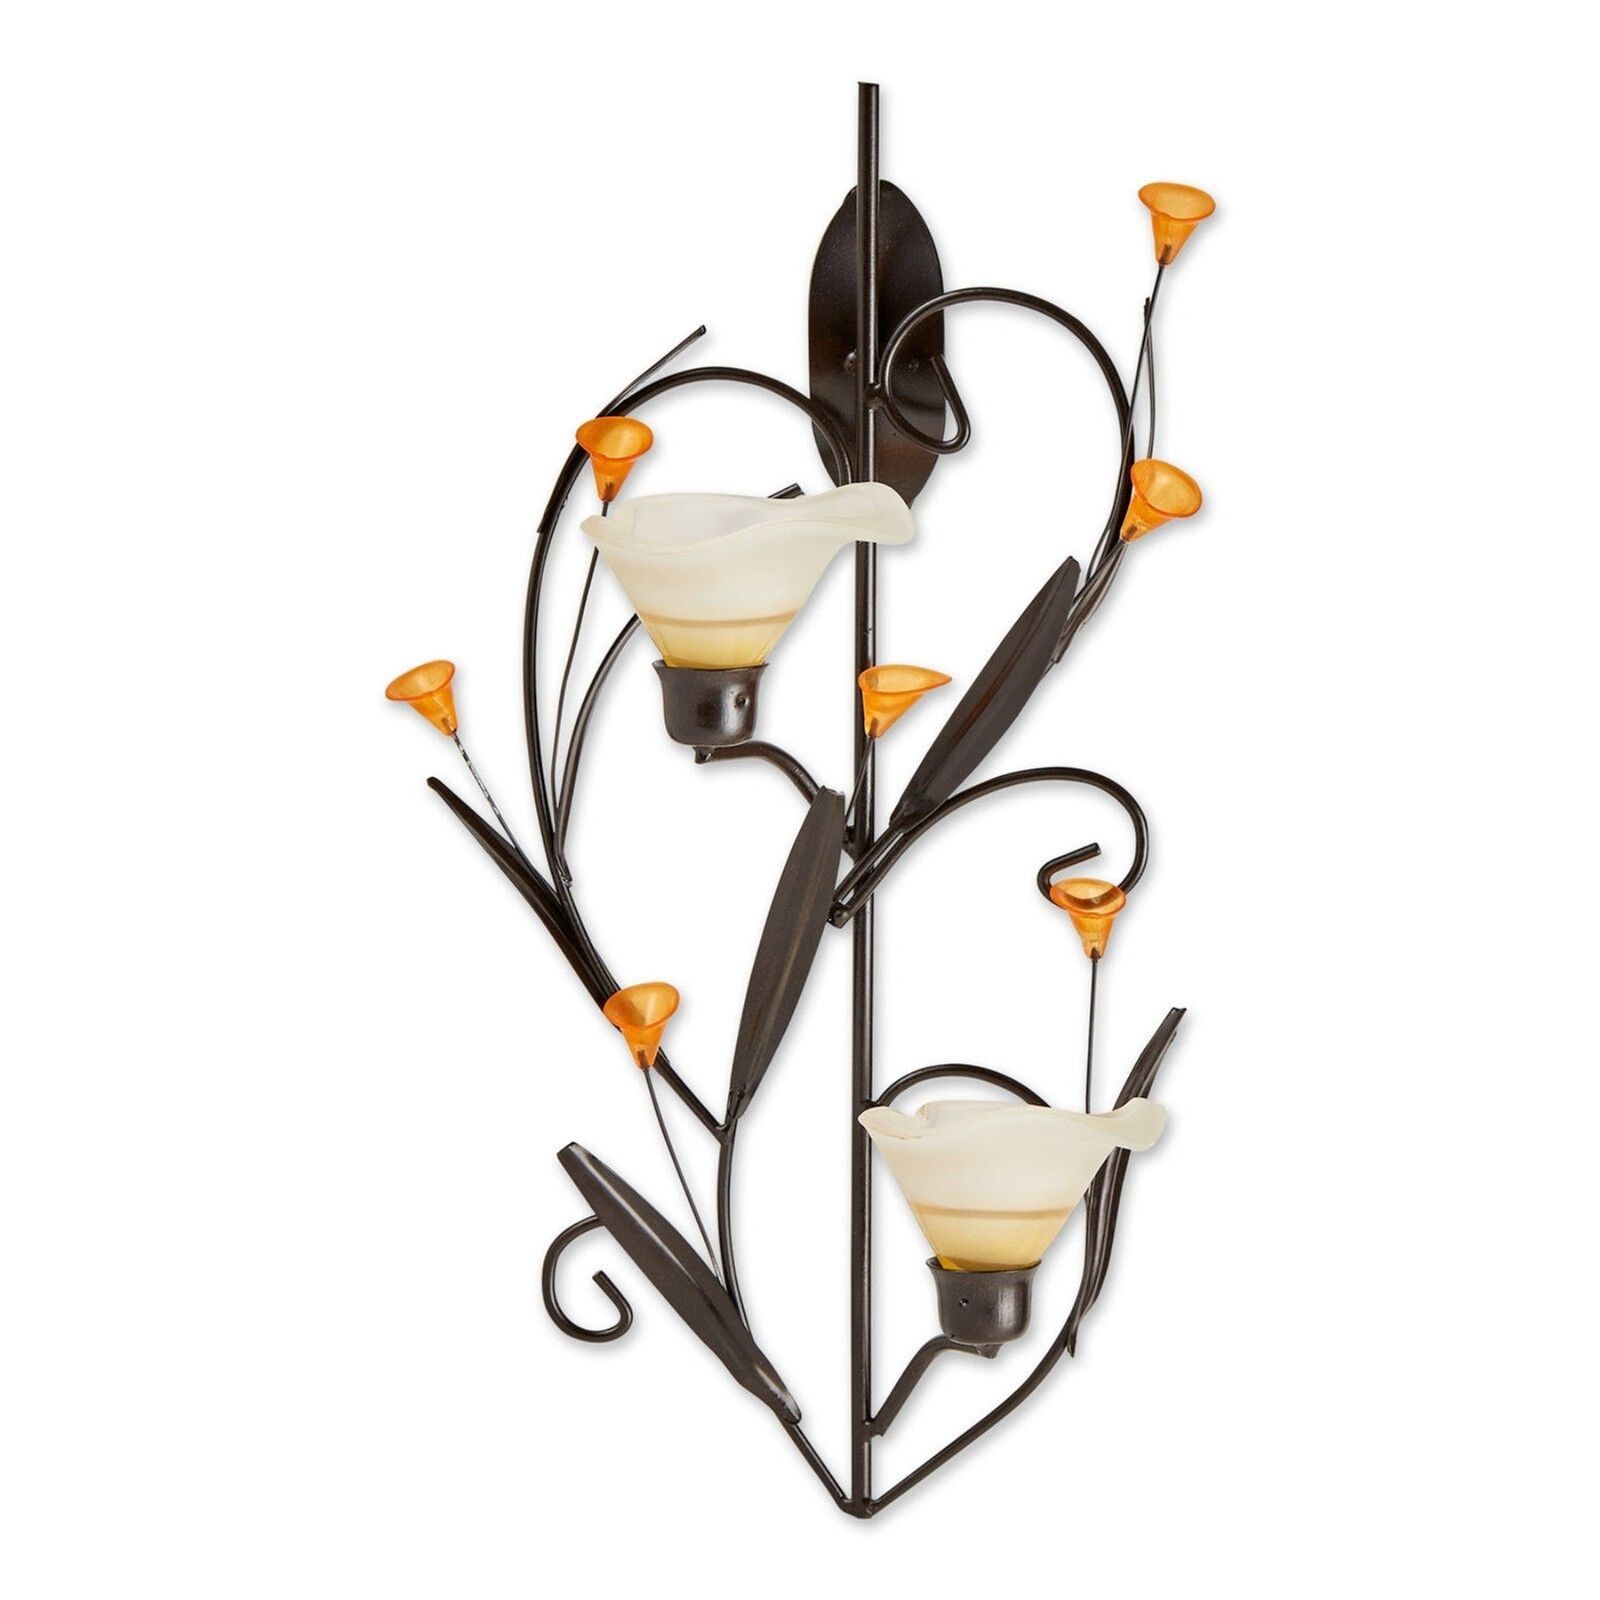 Primary image for Decorative Wall Sconce Lilies Art Sculpture Candle Holder Tealight LED Holder